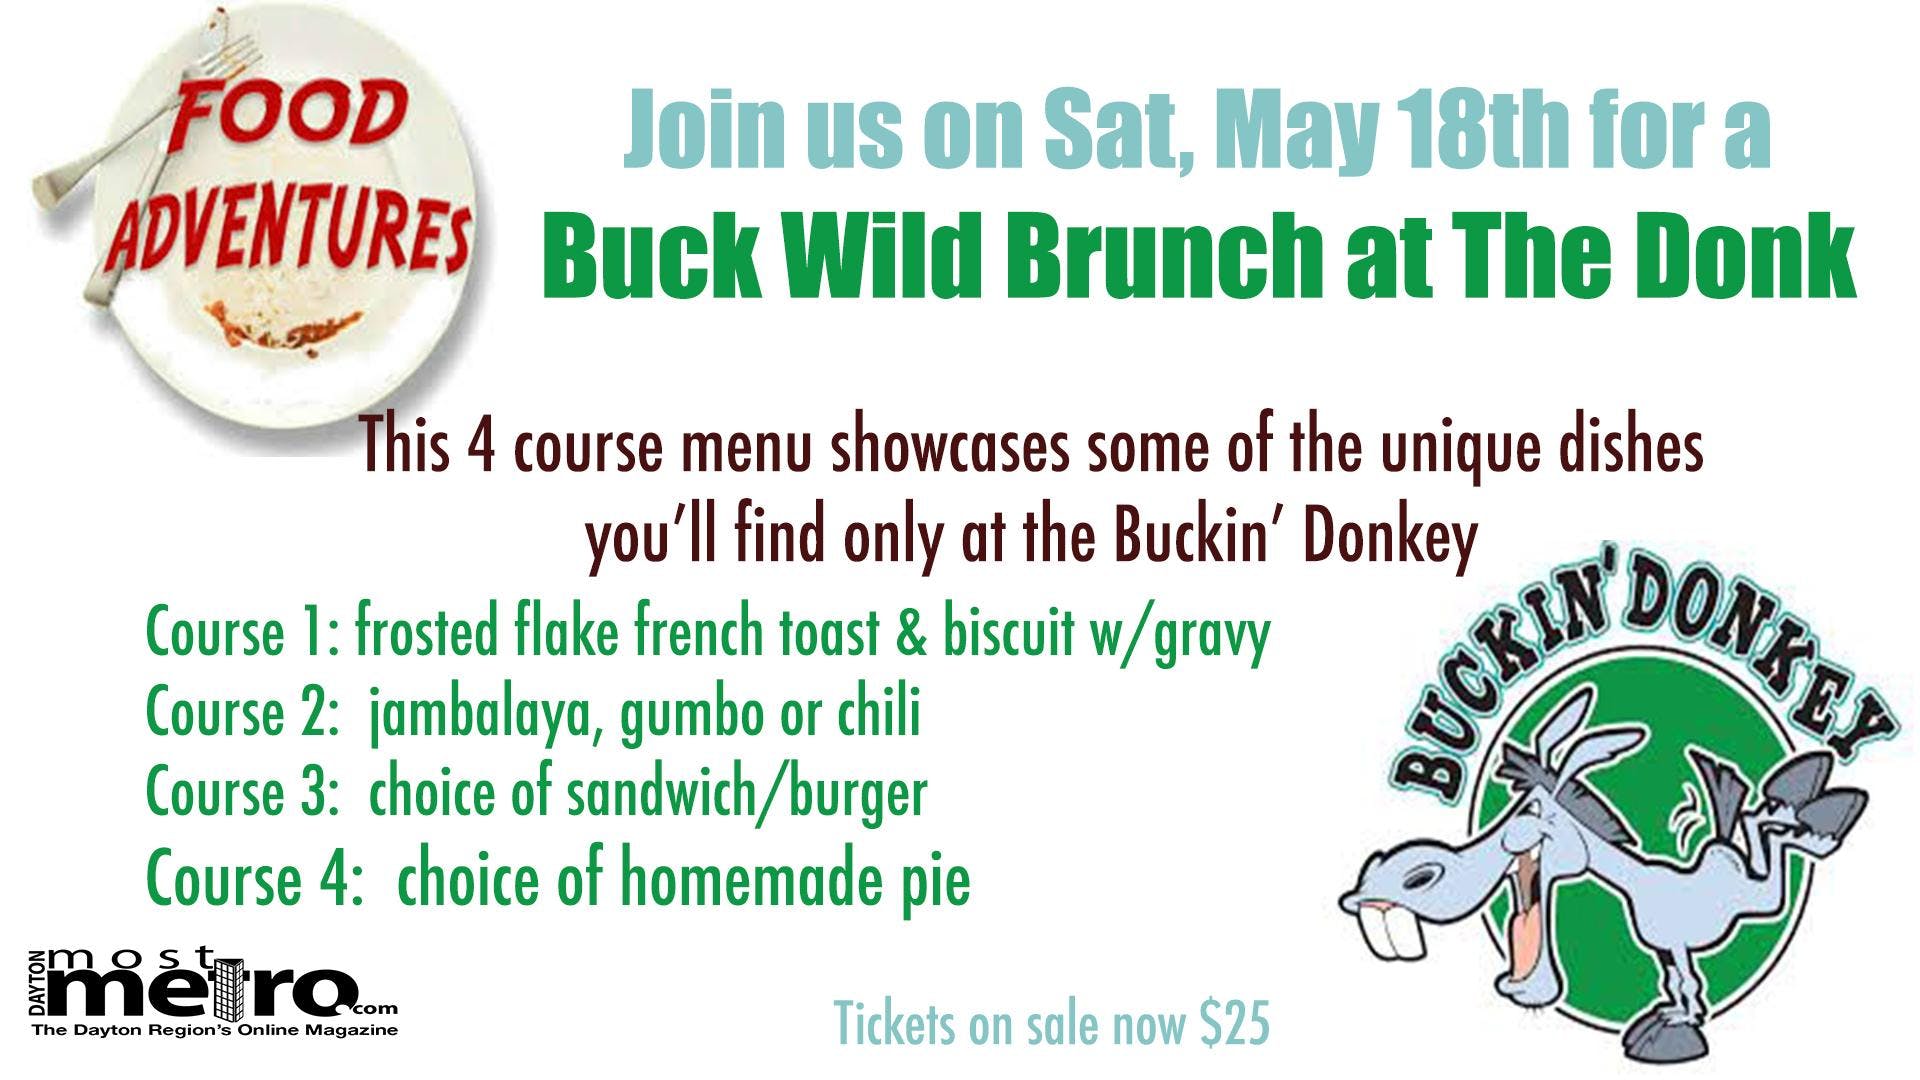 Food Adventure Buck Wild Brunch At The Donk May